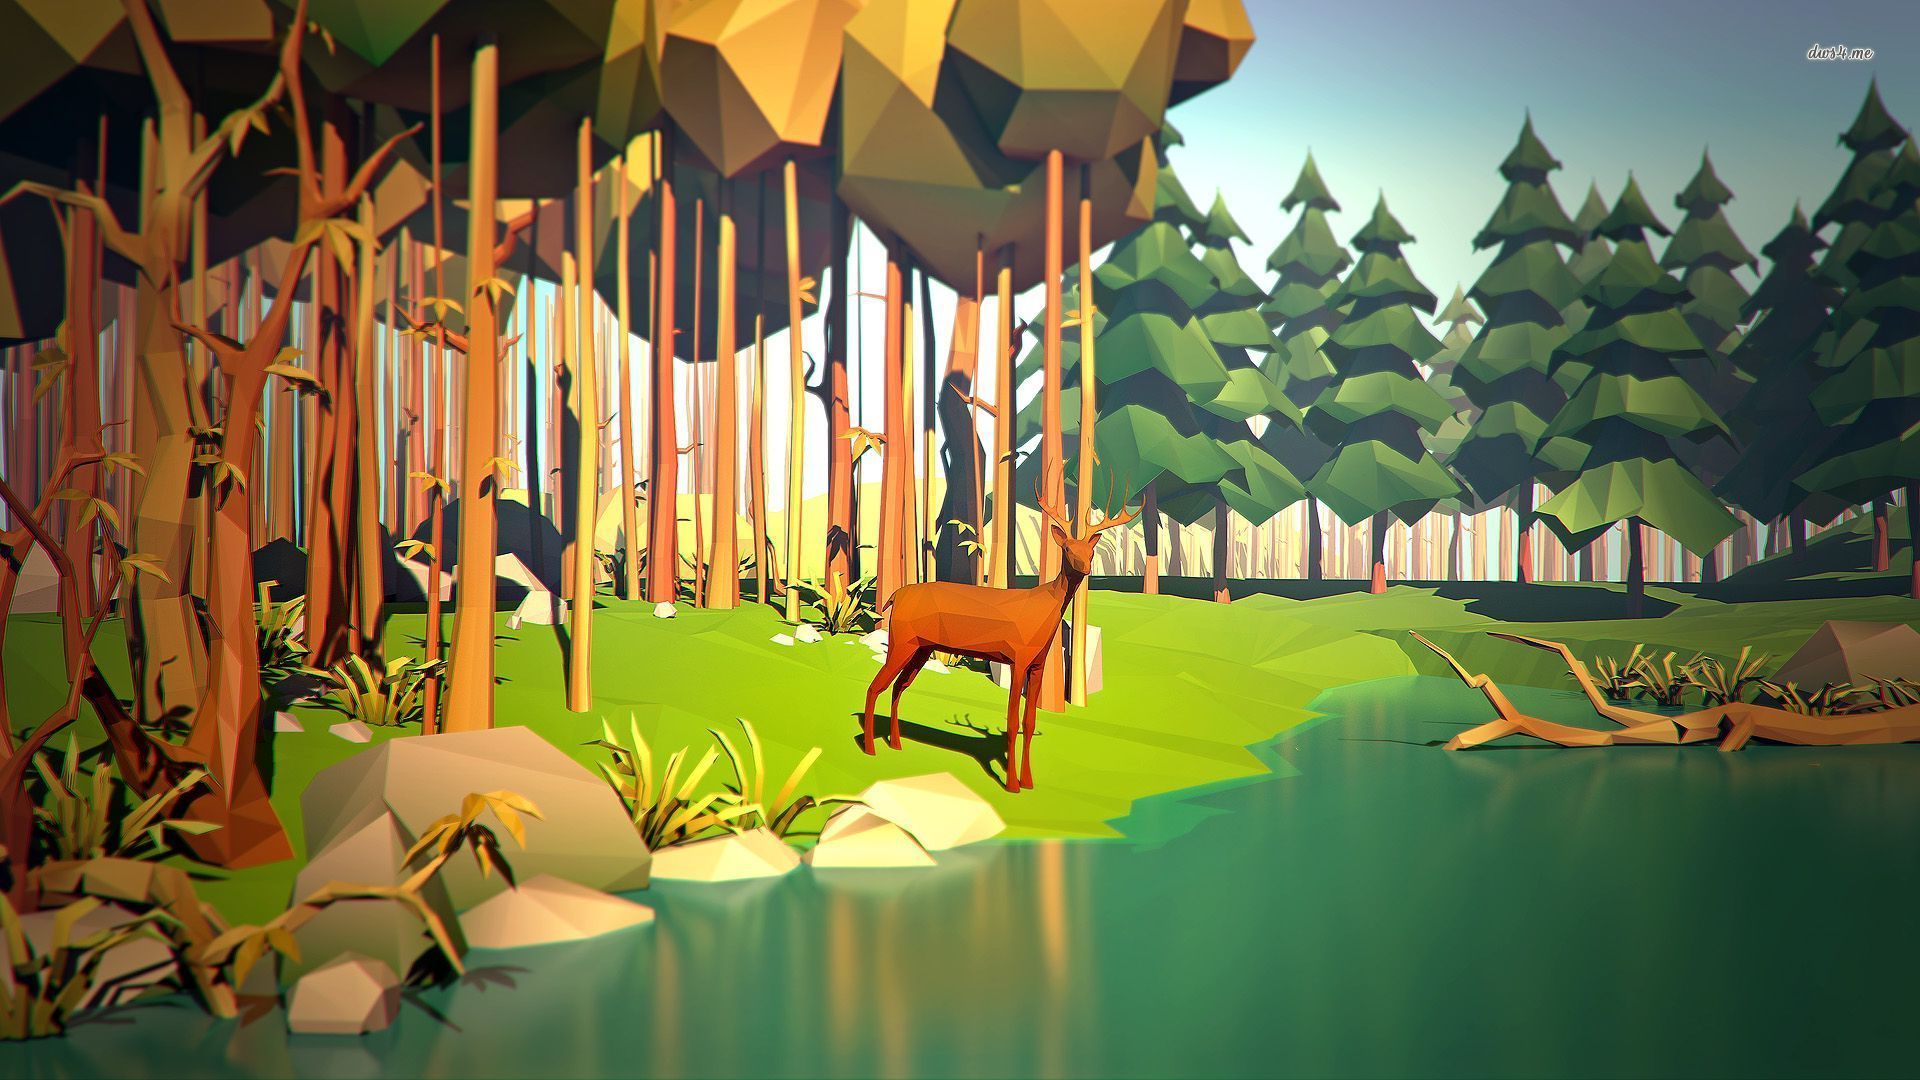 Polygon Deer At The Forest Pond Wallpaper